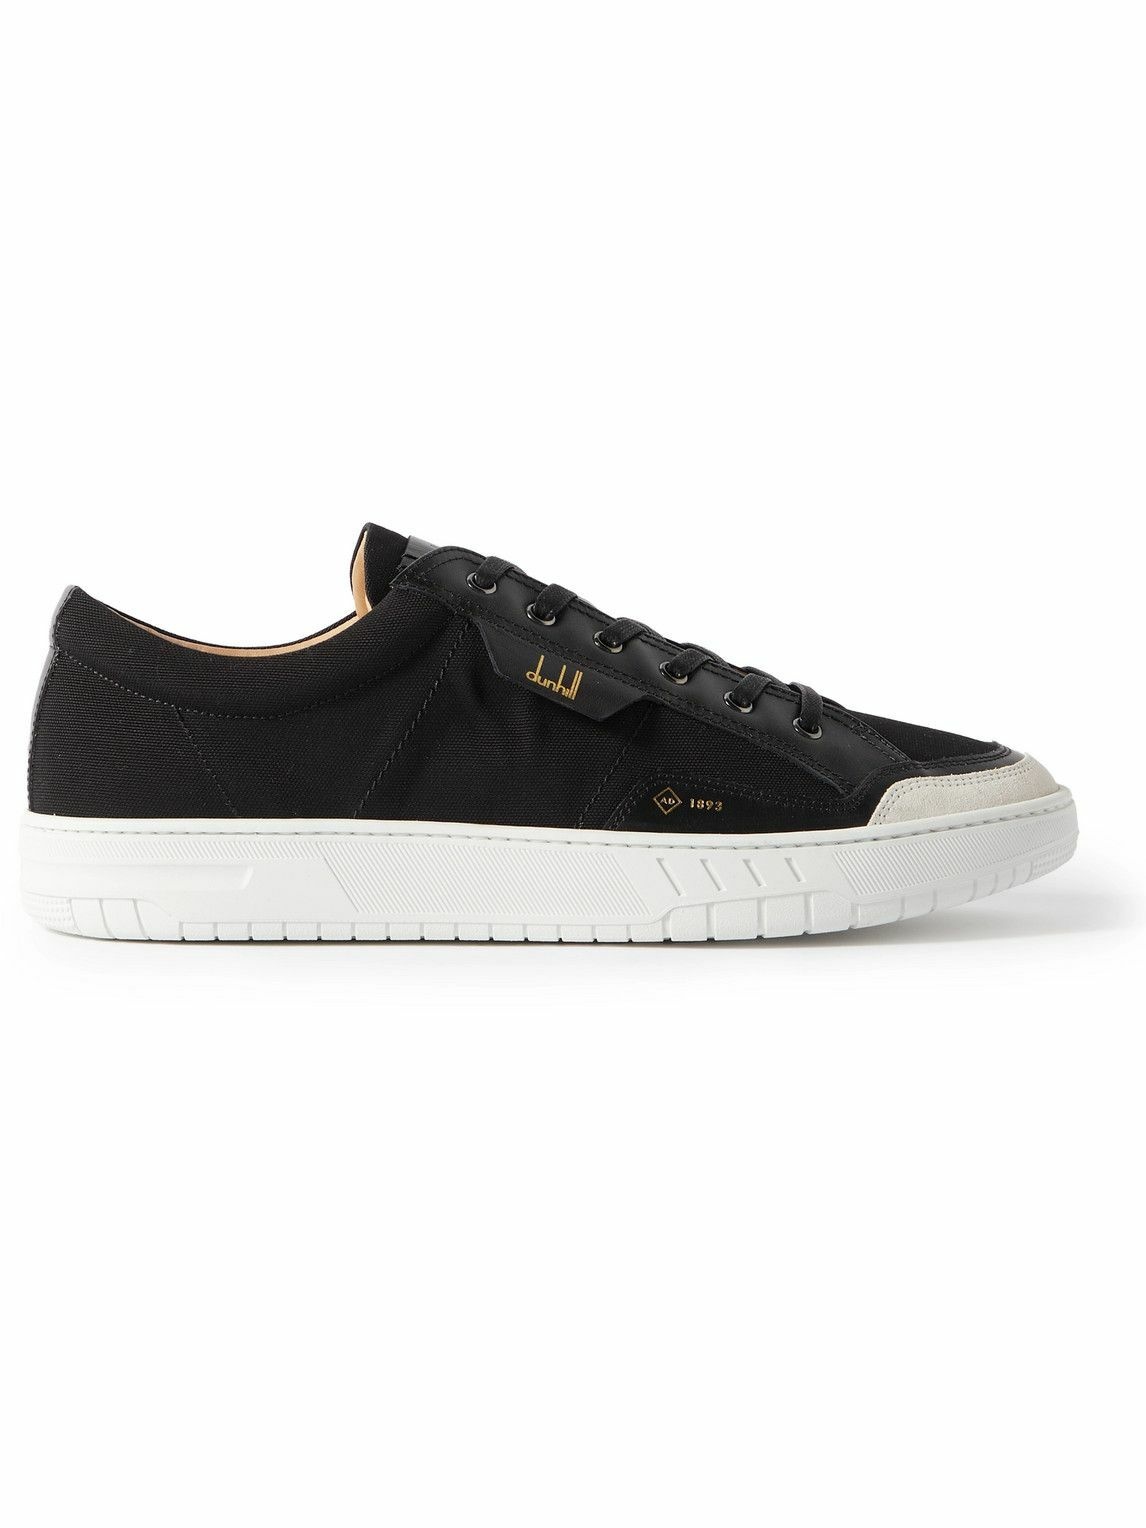 Dunhill - Court Leather- and Suede-Trimmed Canvas Sneakers - Black Dunhill